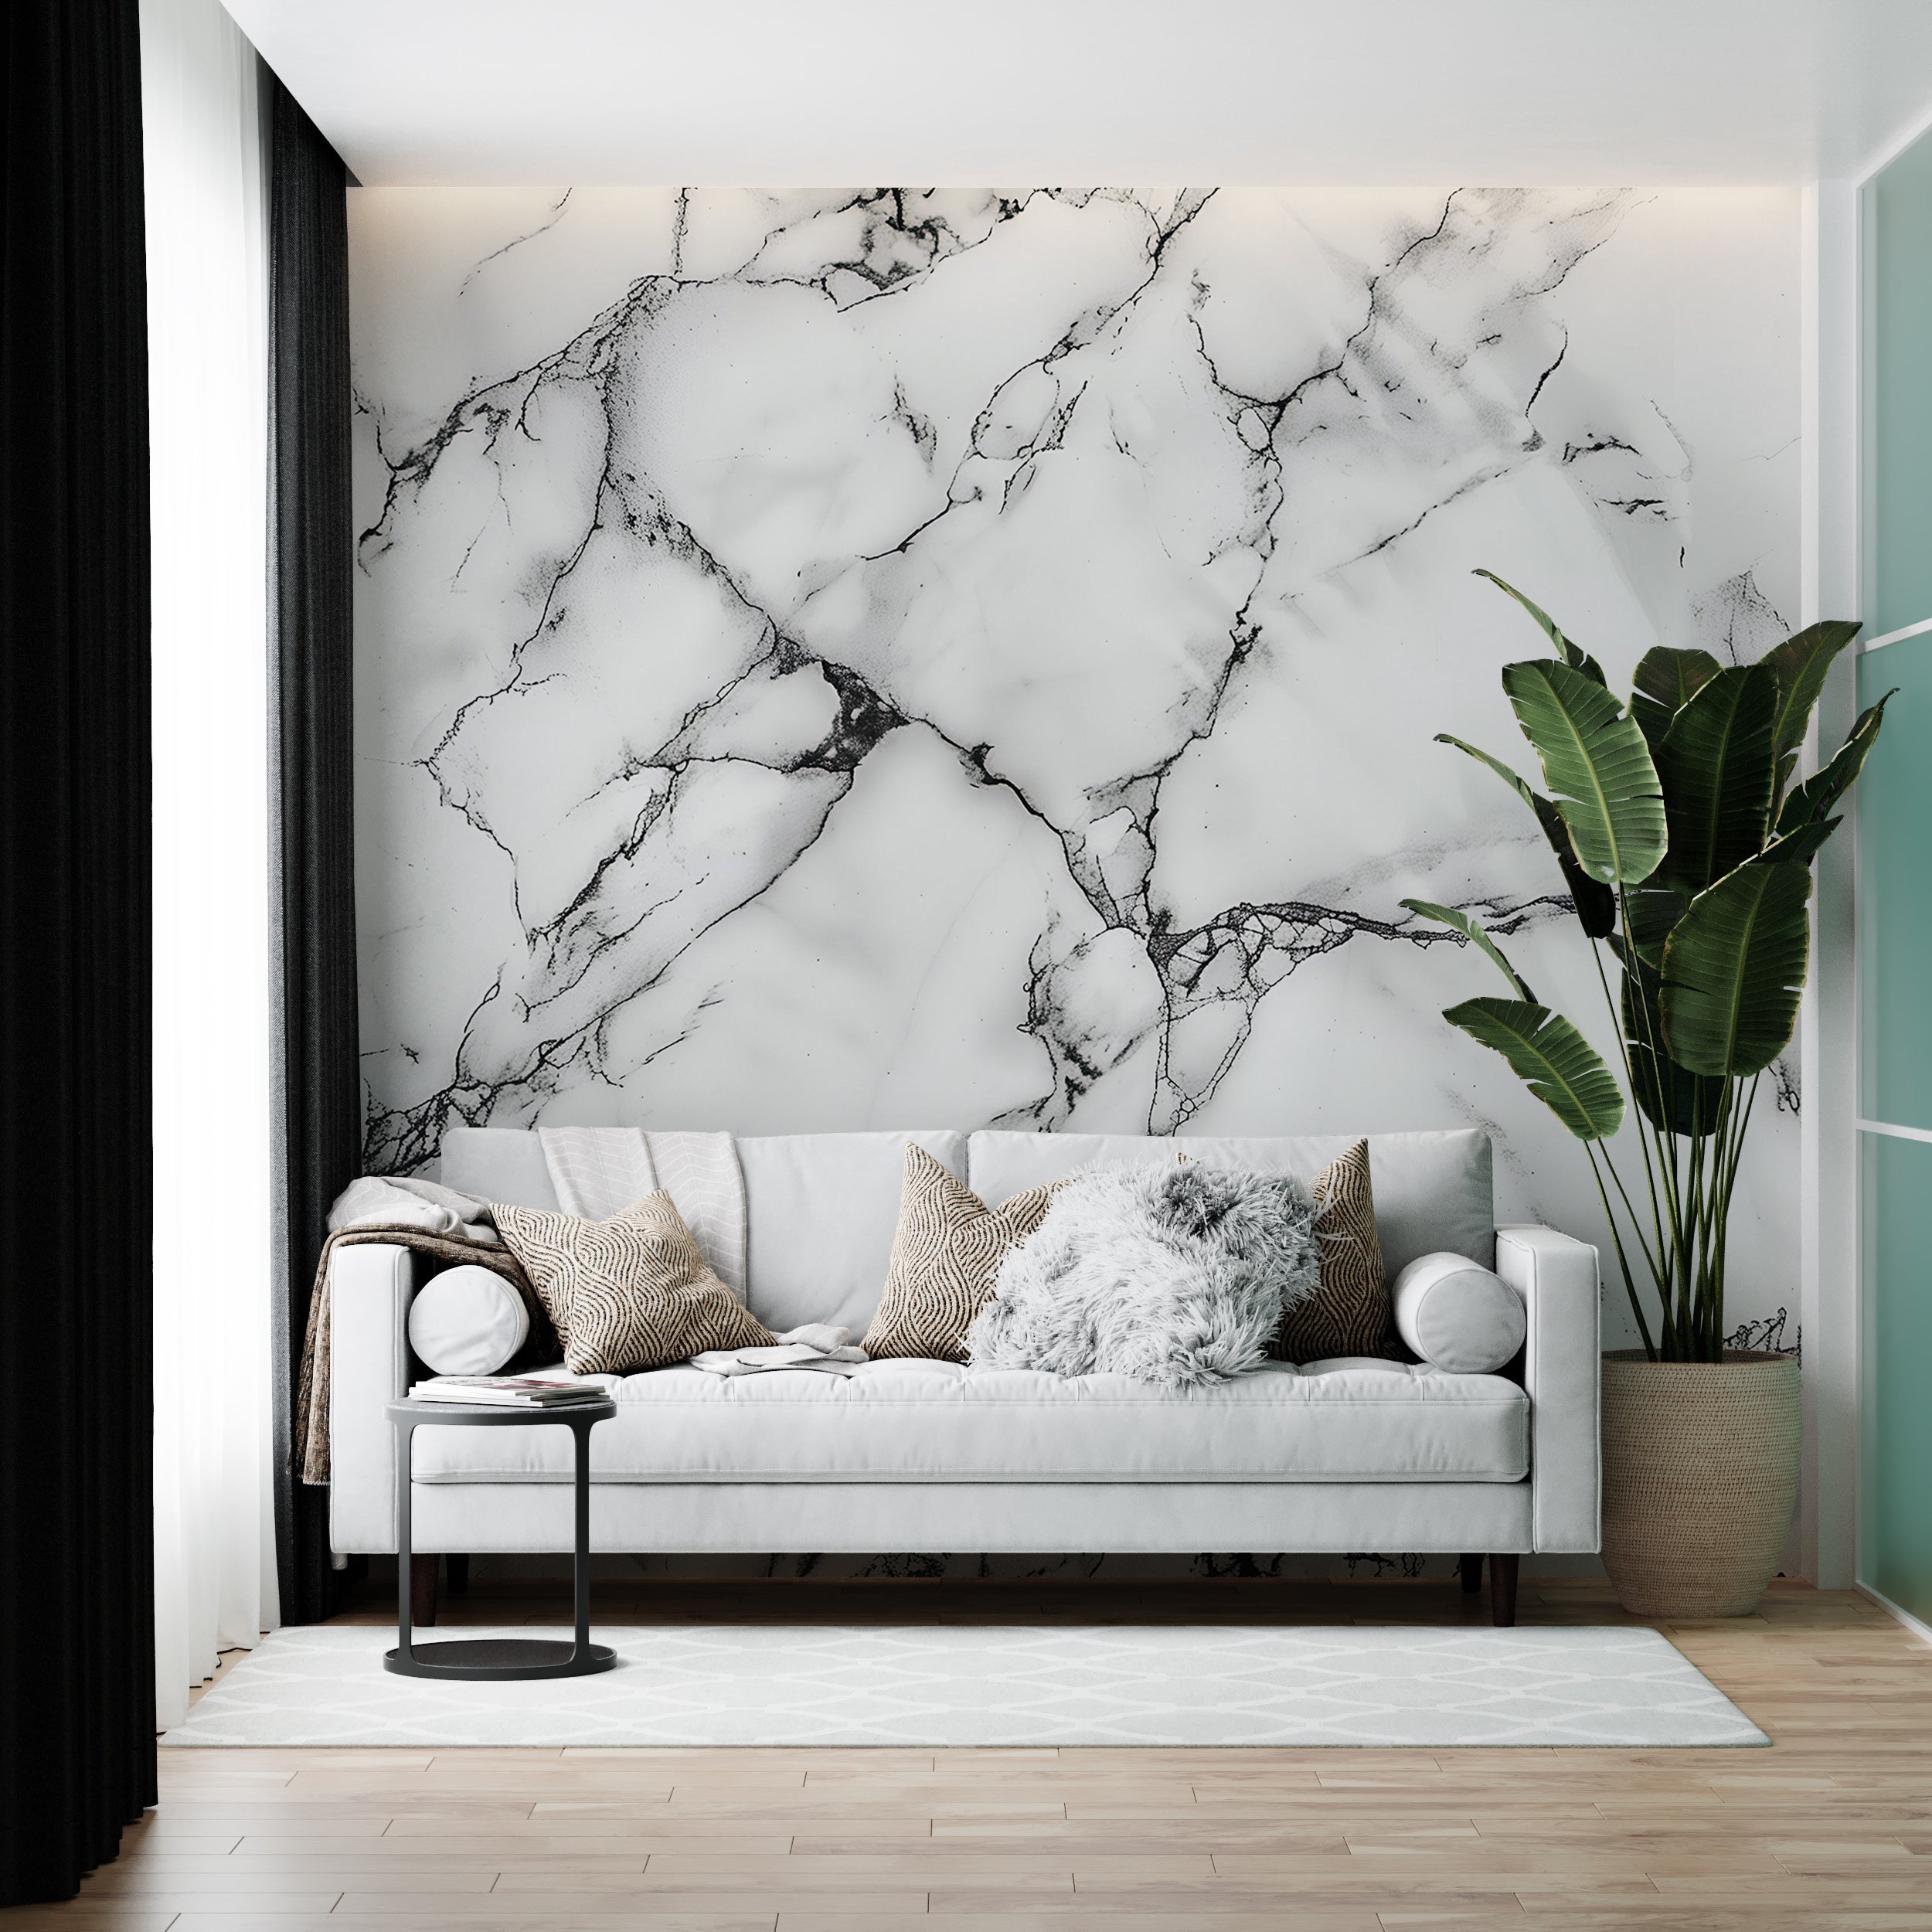 Black&White Marble Mural, Self-adhesive Natural Marble Wallpaper, Stone Texture Mural, Removable White Marble with Black Lines Decor